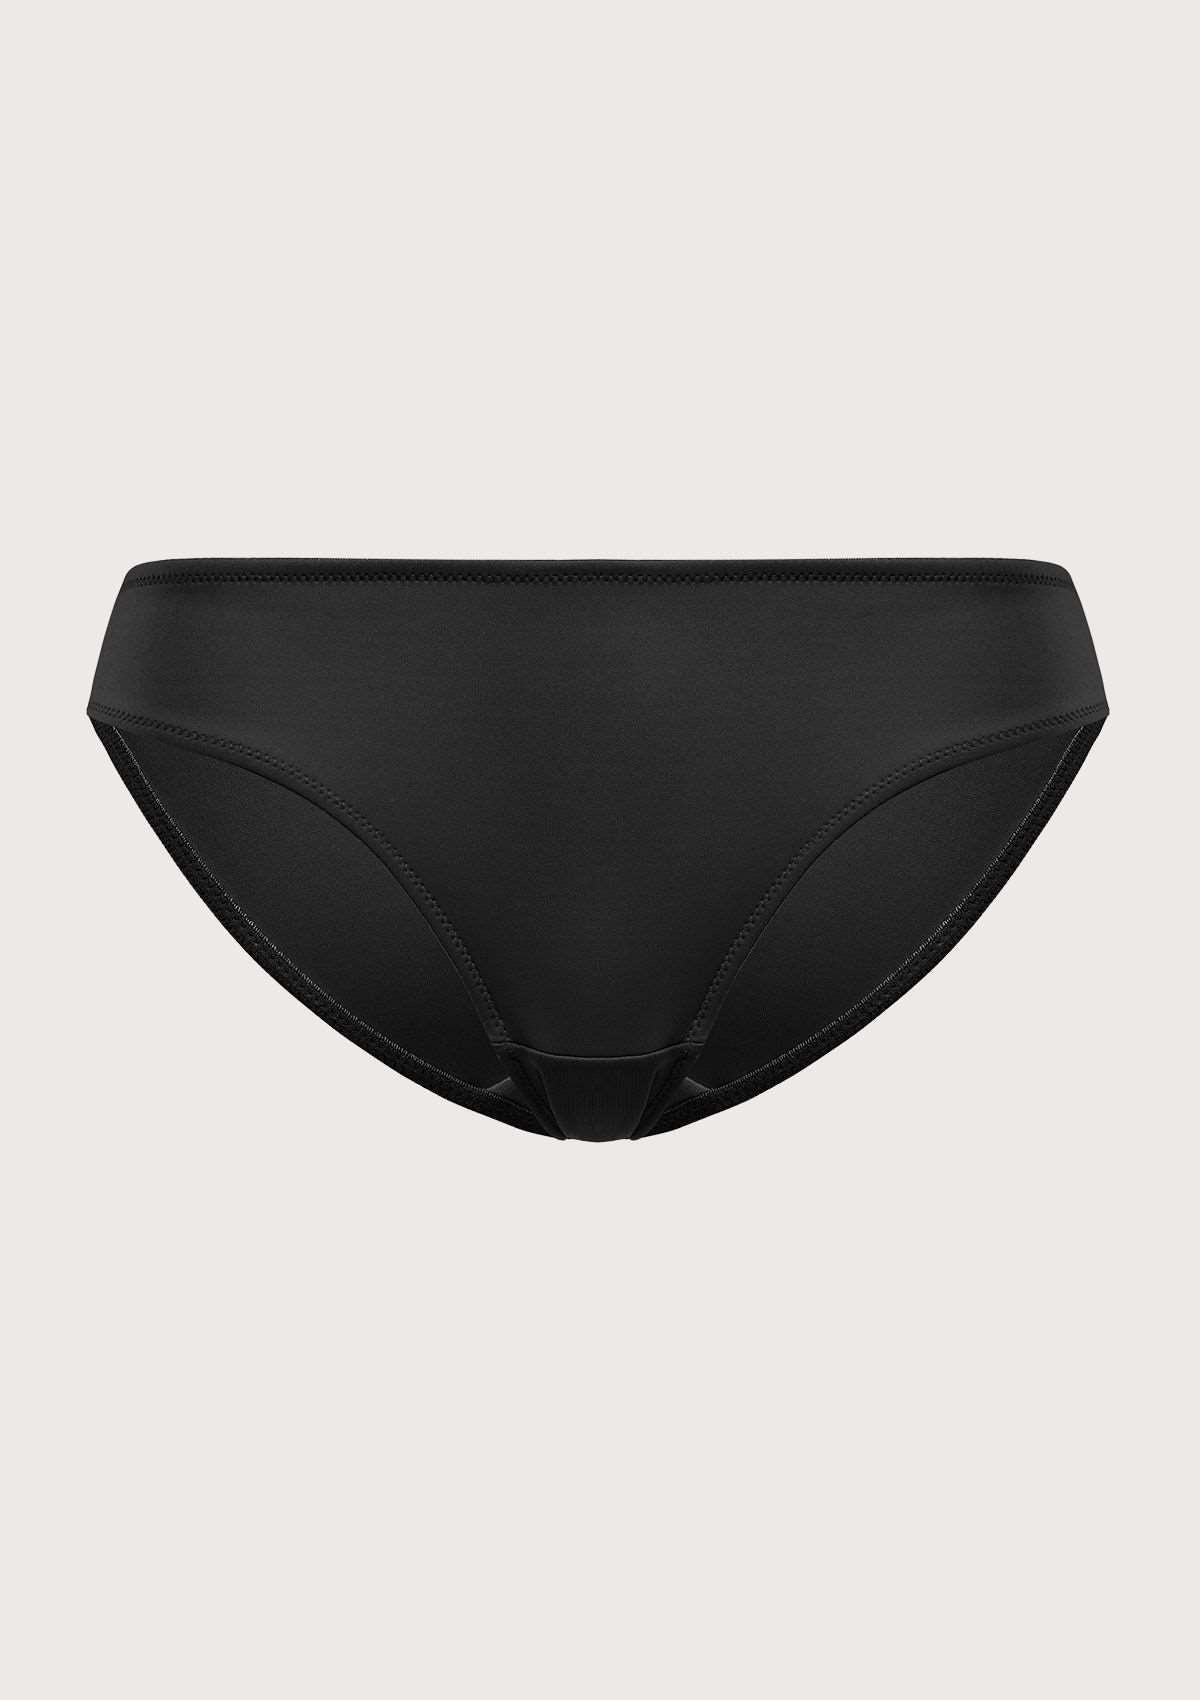 HSIA Patricia Smooth Classic Soft Stretch Panty - Everyday Comfort - M / Black